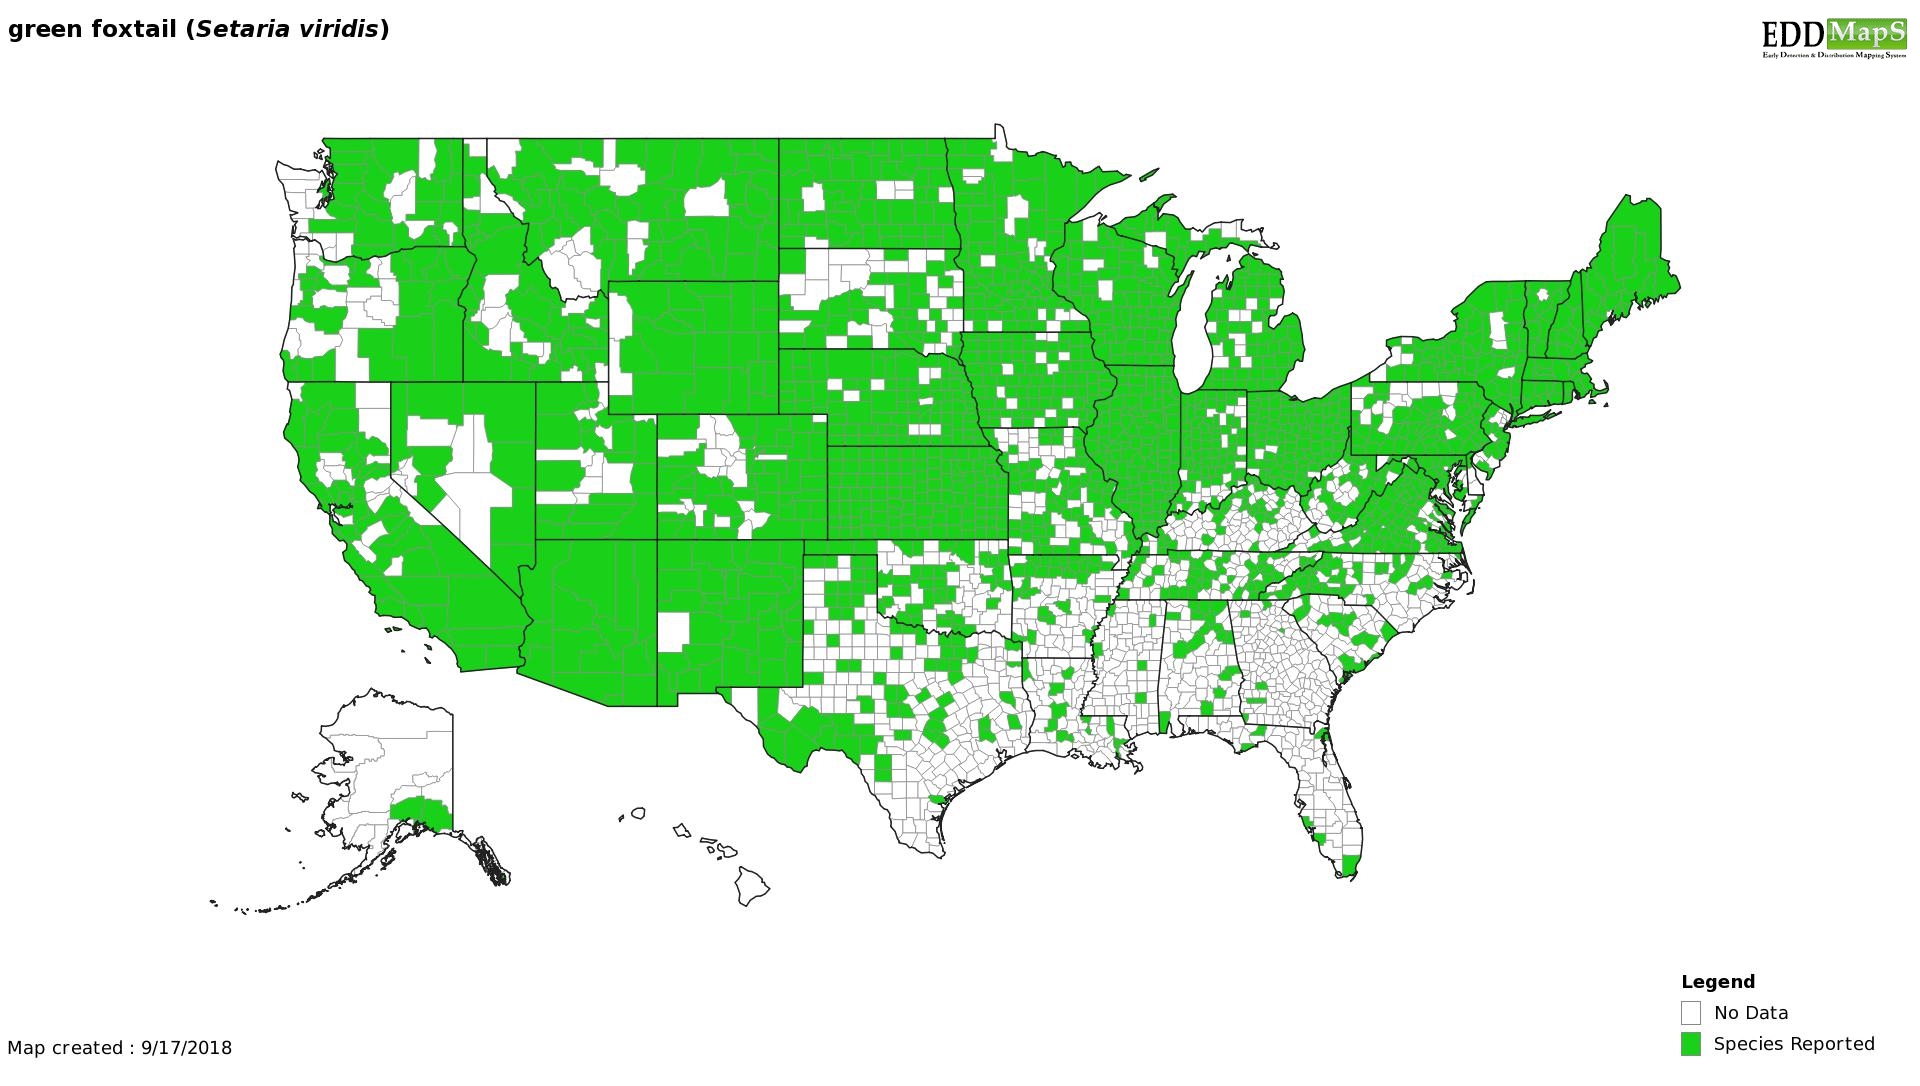 Green foxtail distribution - United States